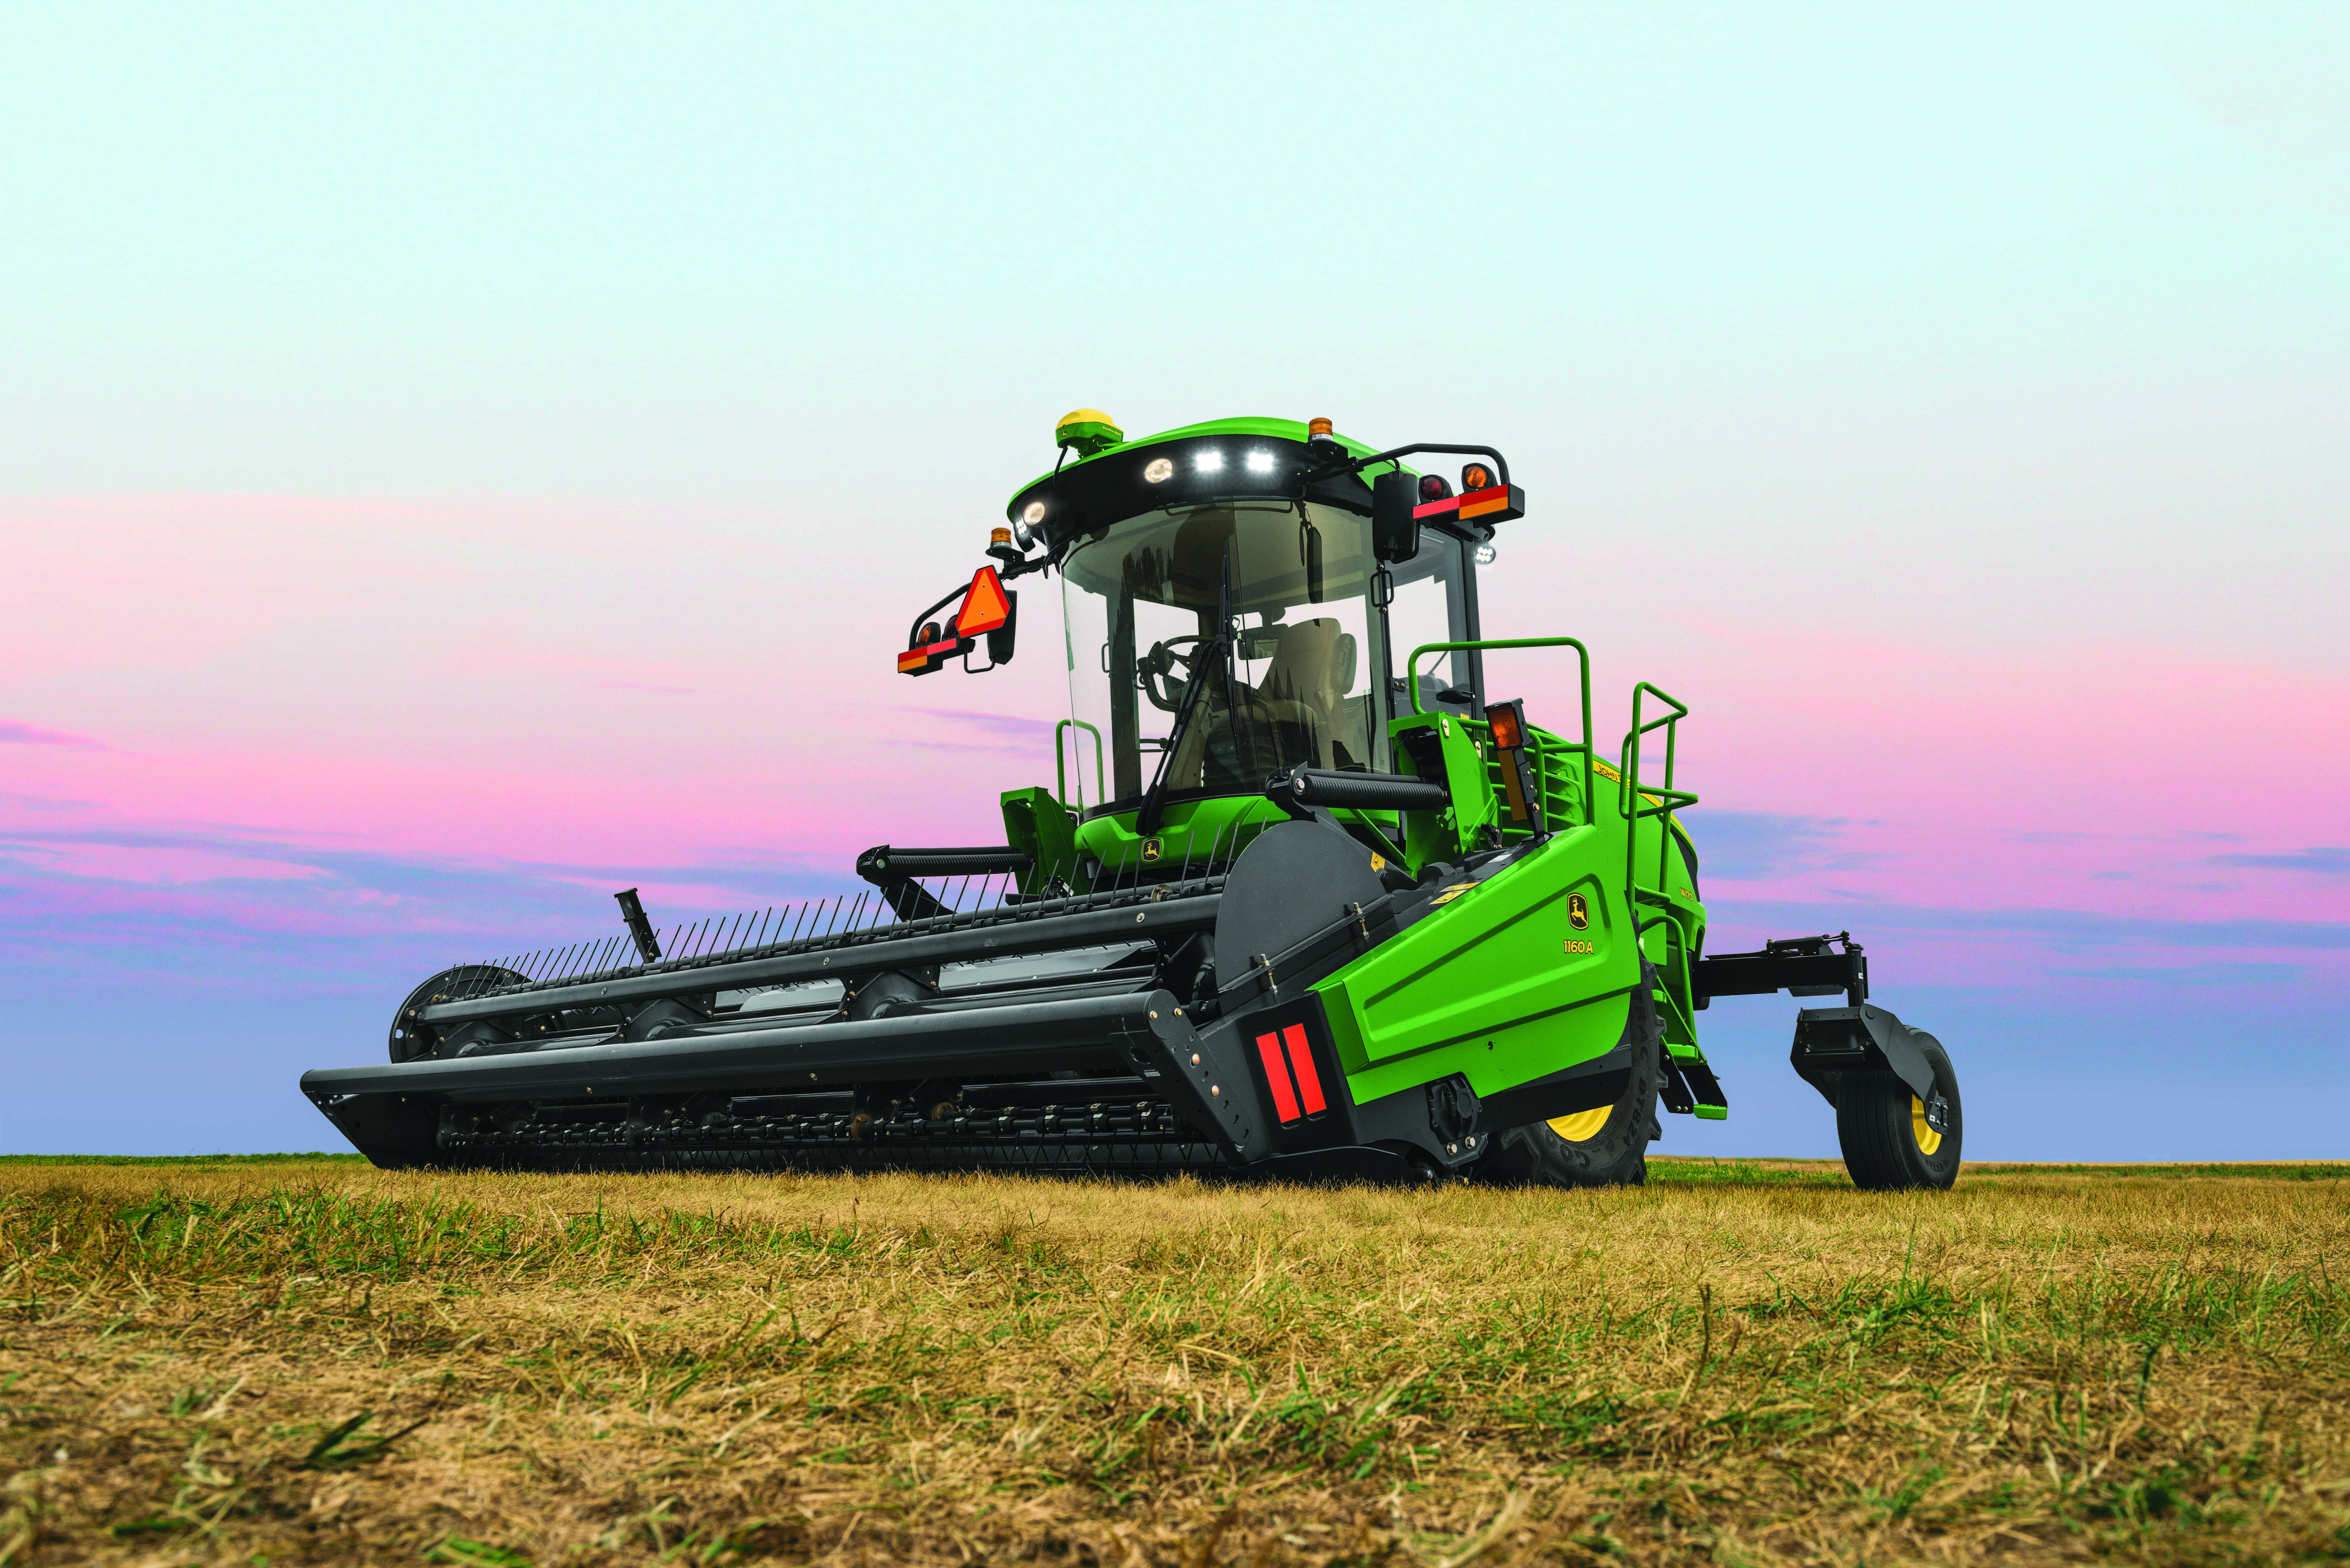 John Deere Targets Canola Growers with New W170 Windrower- Makes Swathing Faster and Easier 